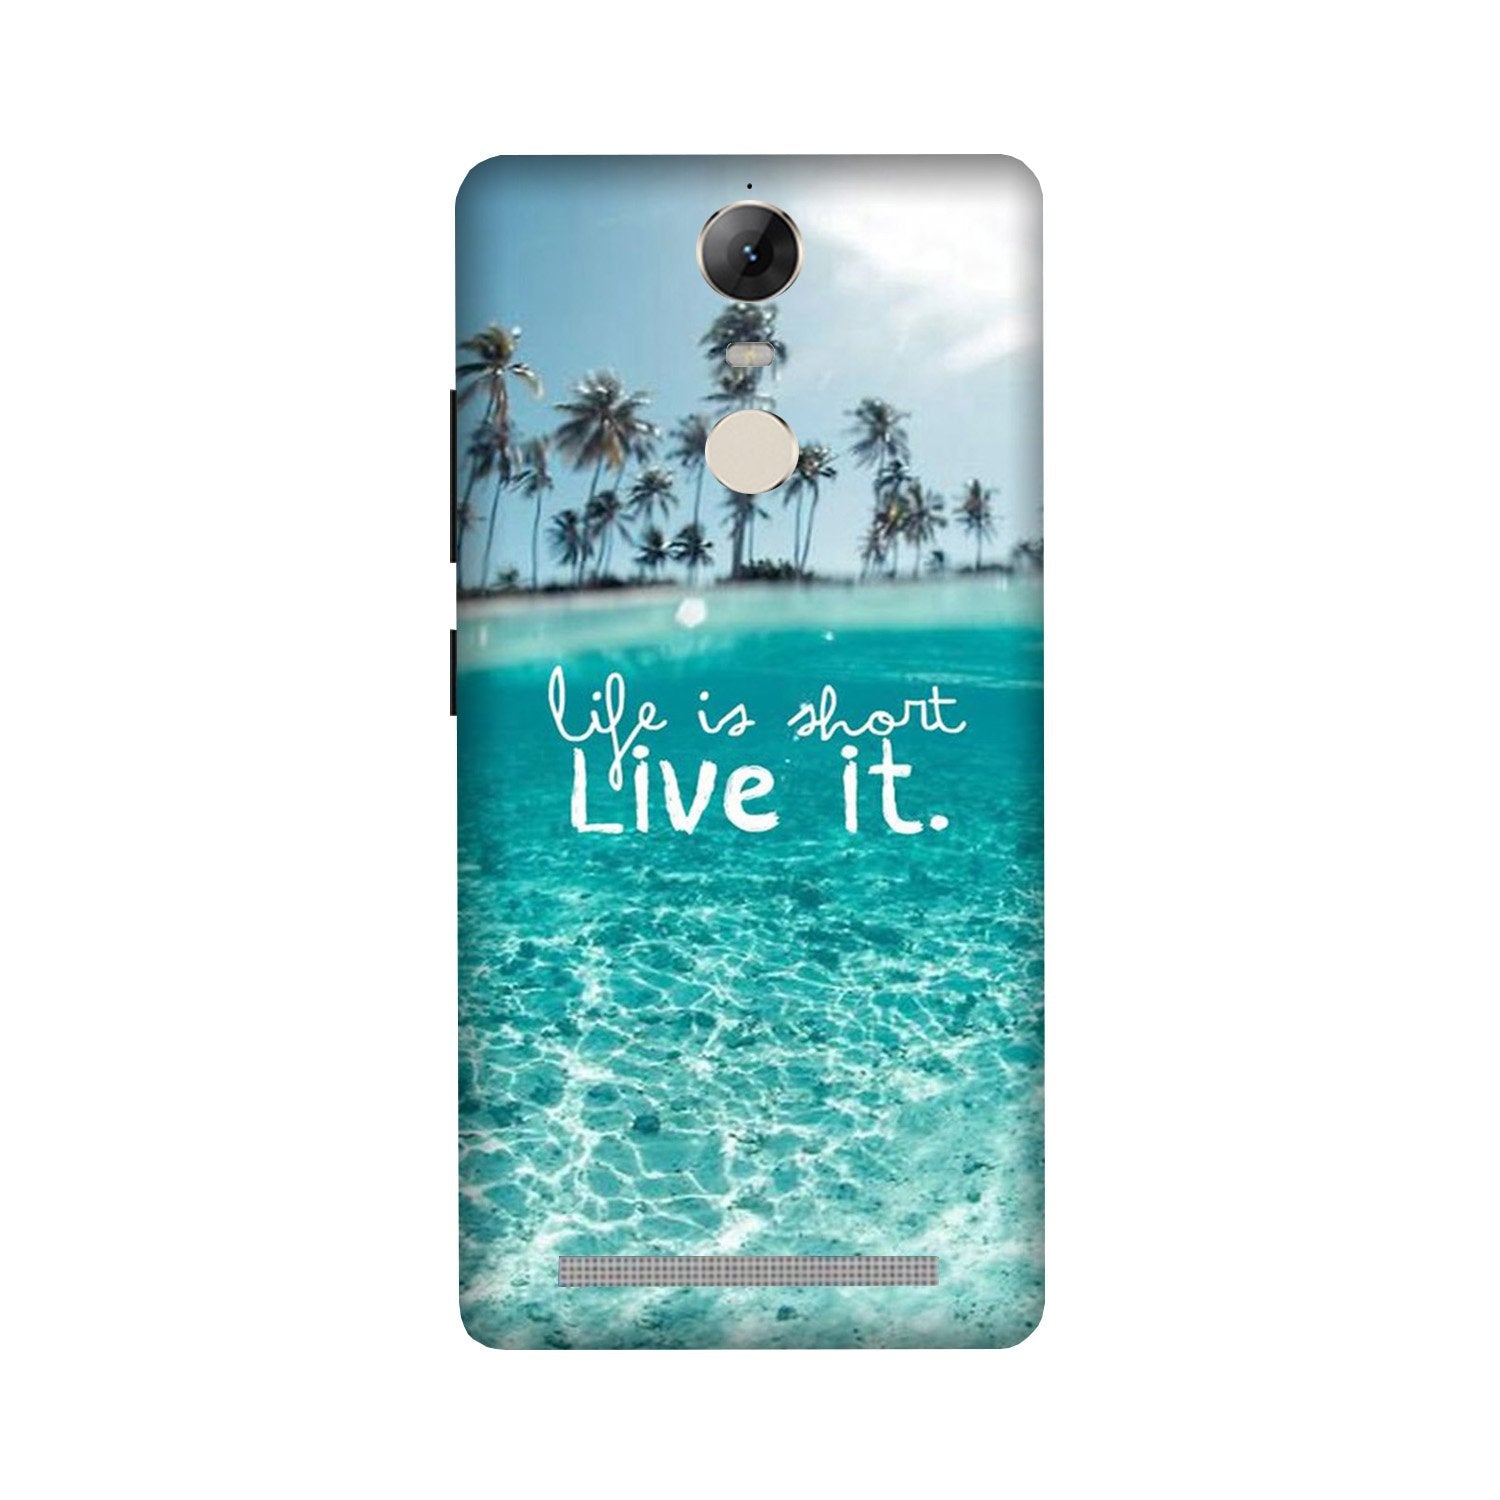 Life is short live it Case for Lenovo Vibe K5 Note